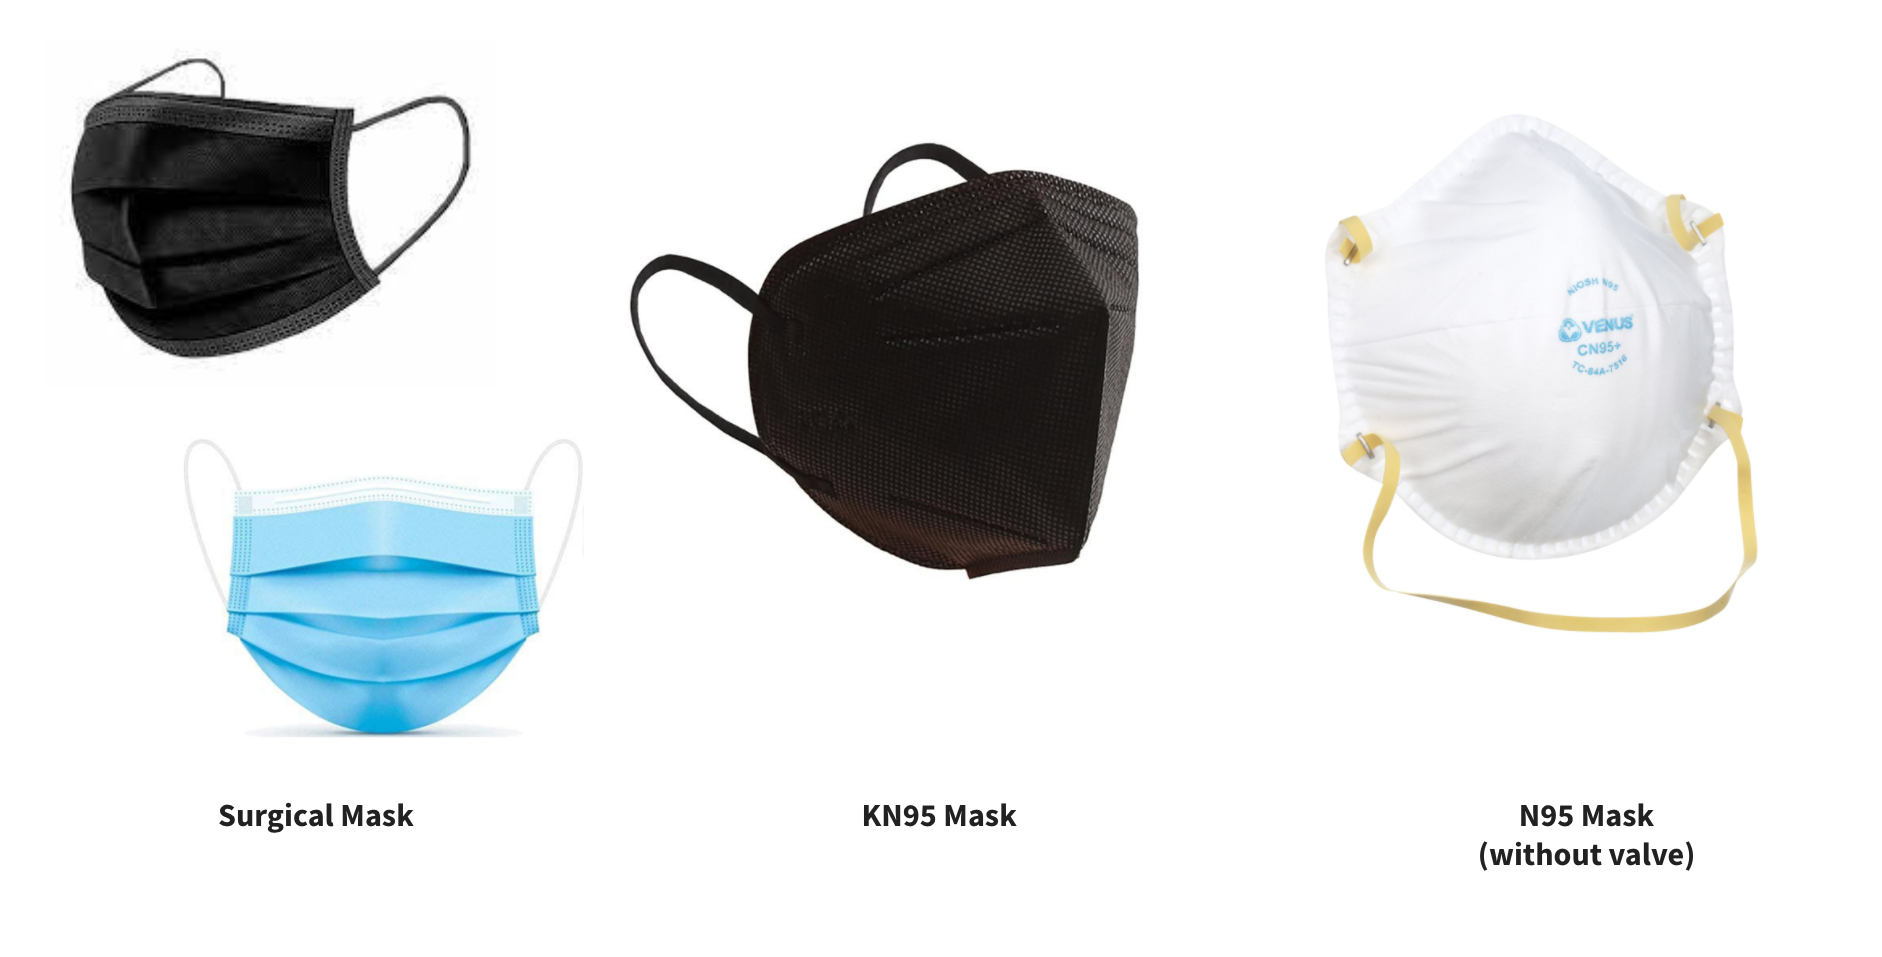 Photo examples of a surgical mask, KN95 mask, and N95 mask (without valve)